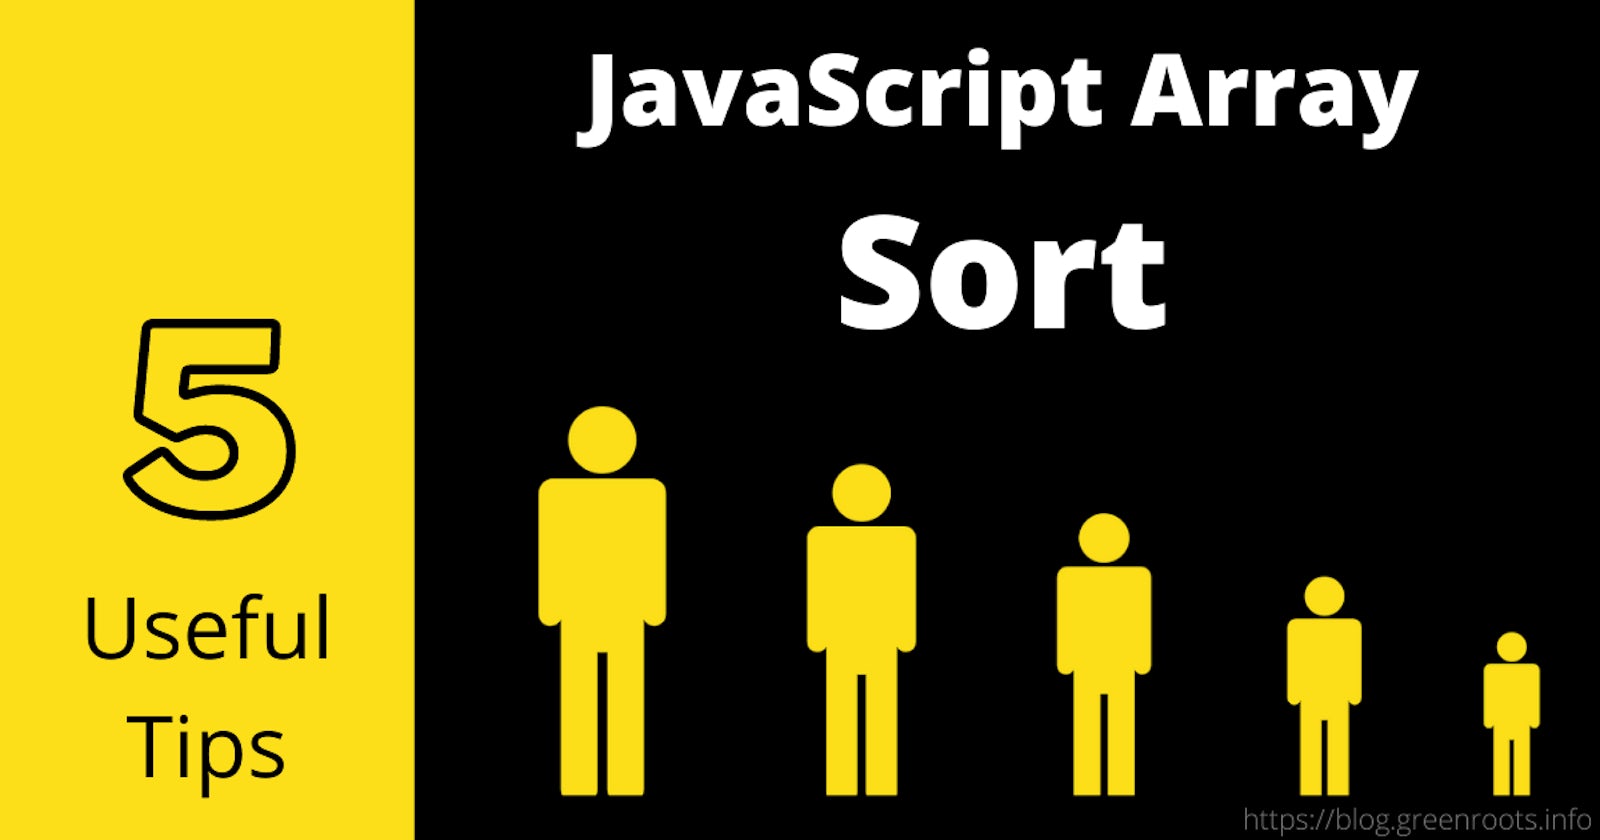 5 useful tips about the JavaScript array sort method